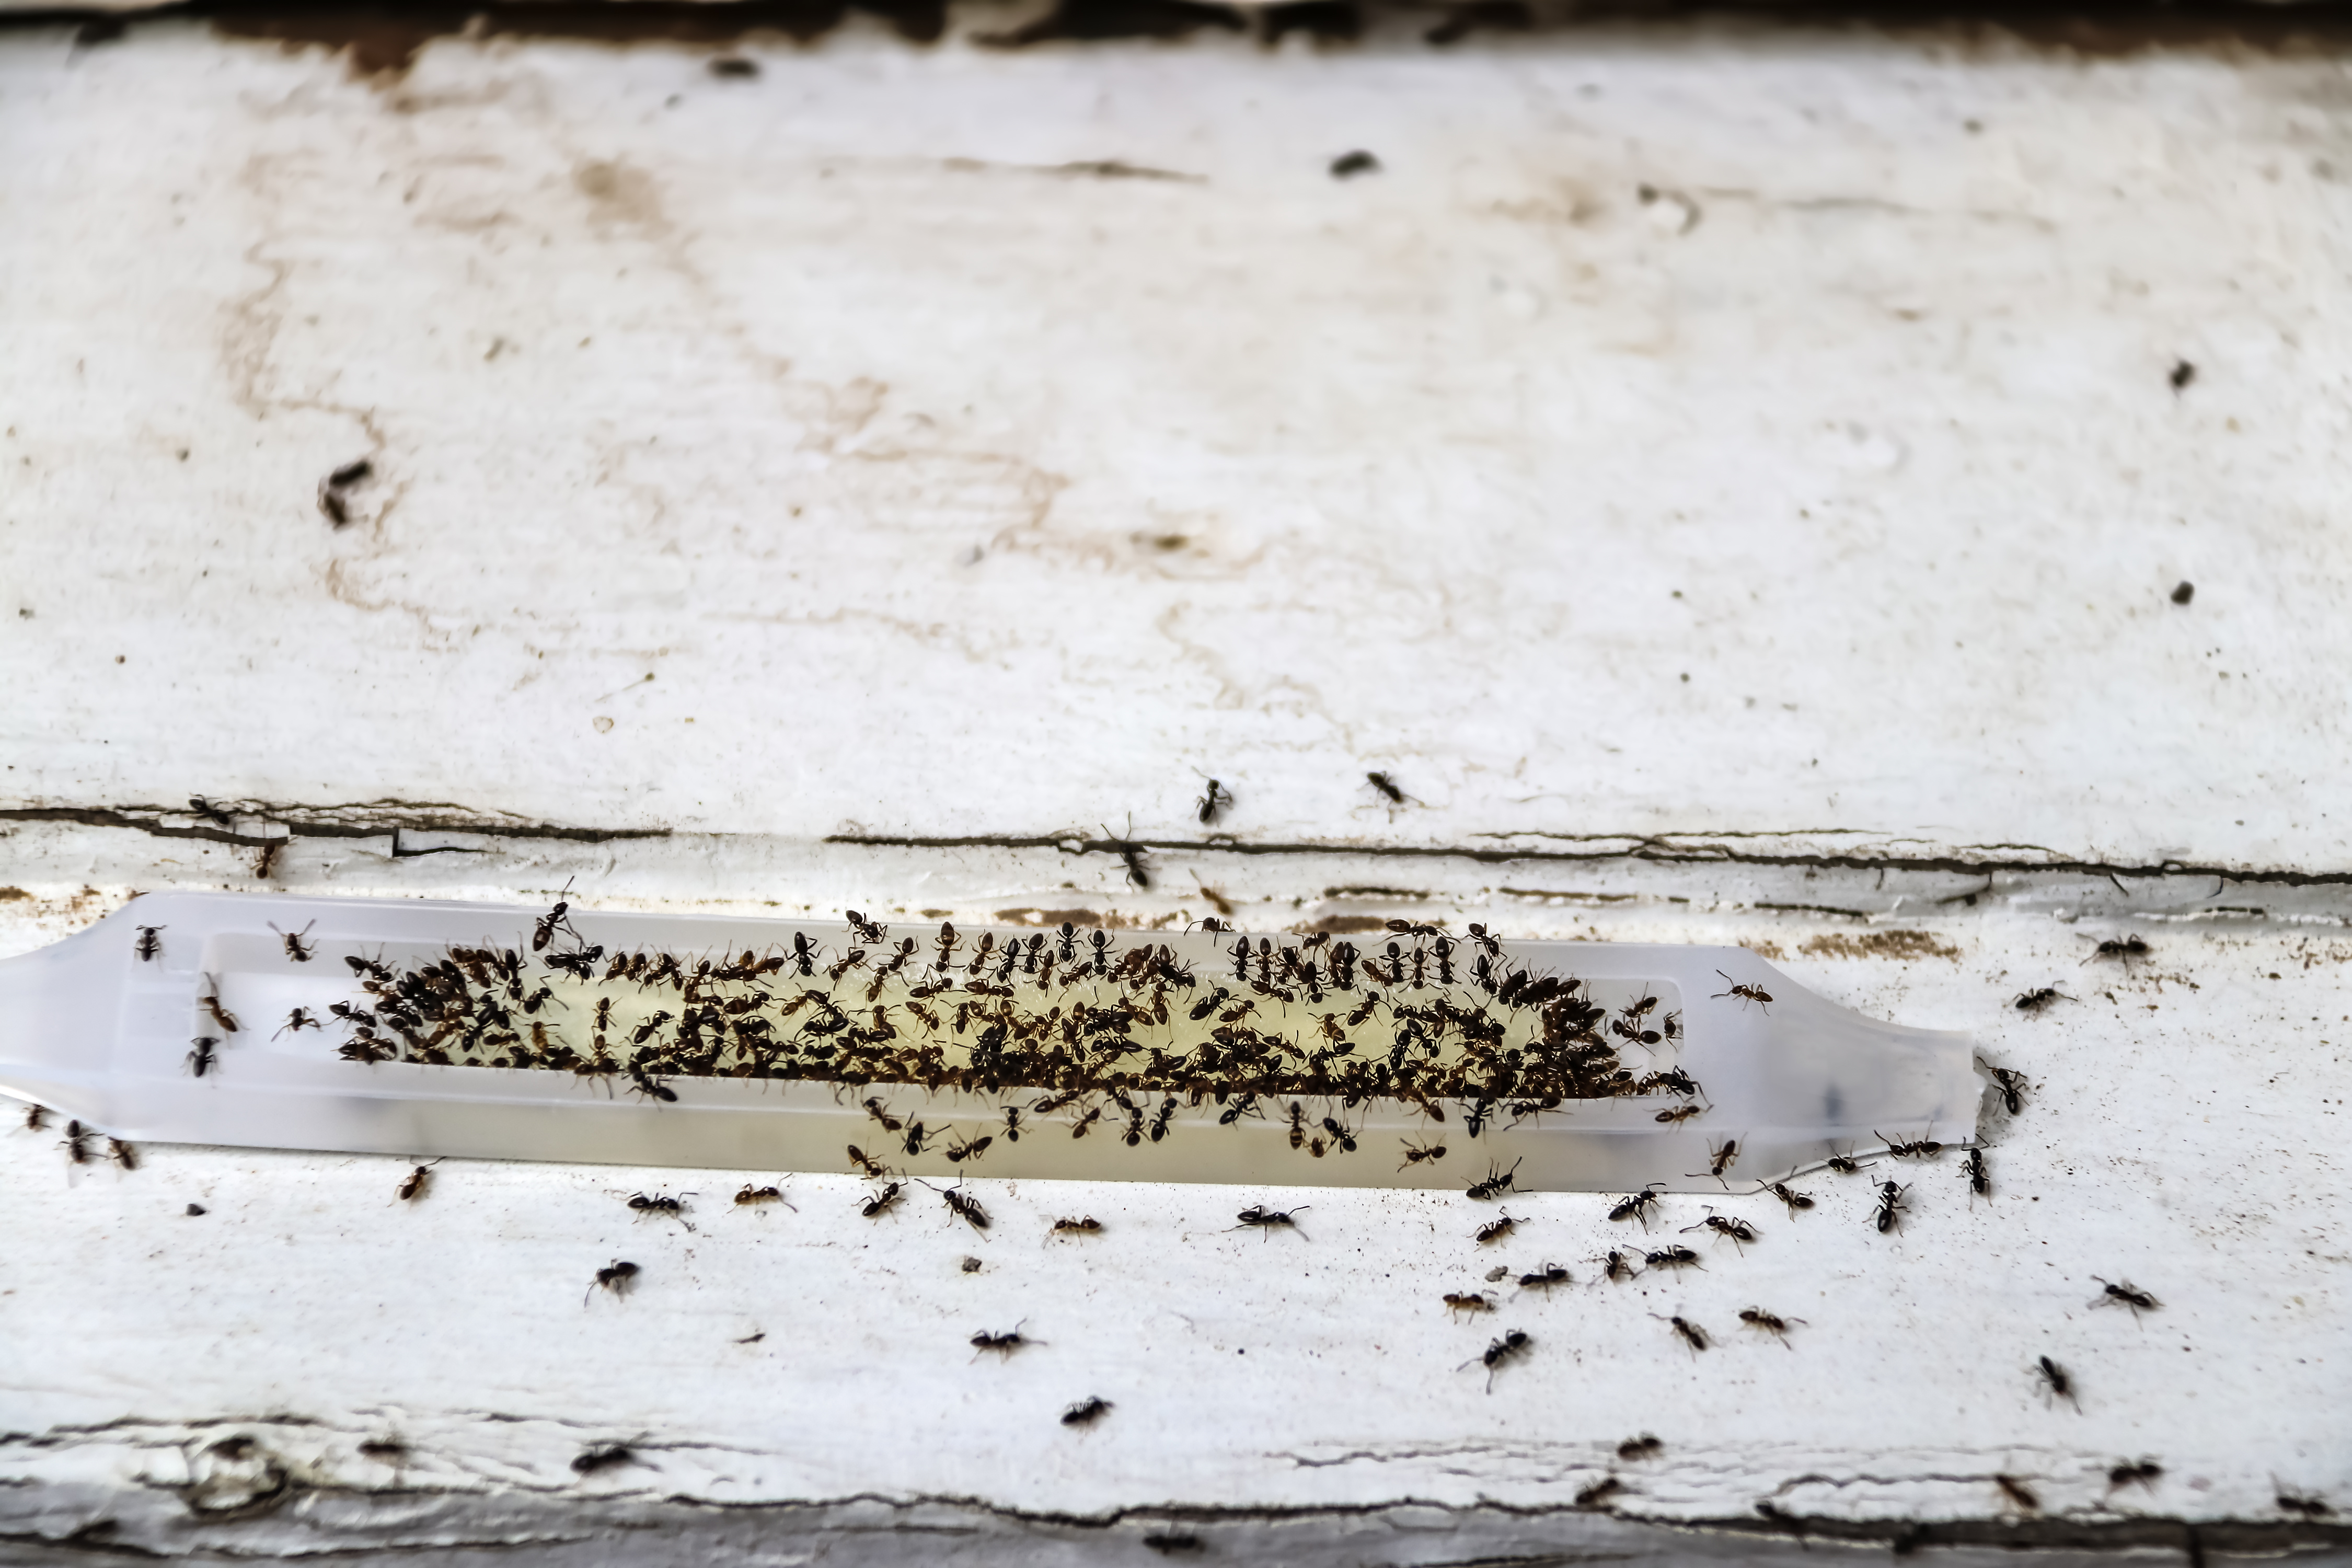 24 Ways On How To Get Rid of Ants Naturally